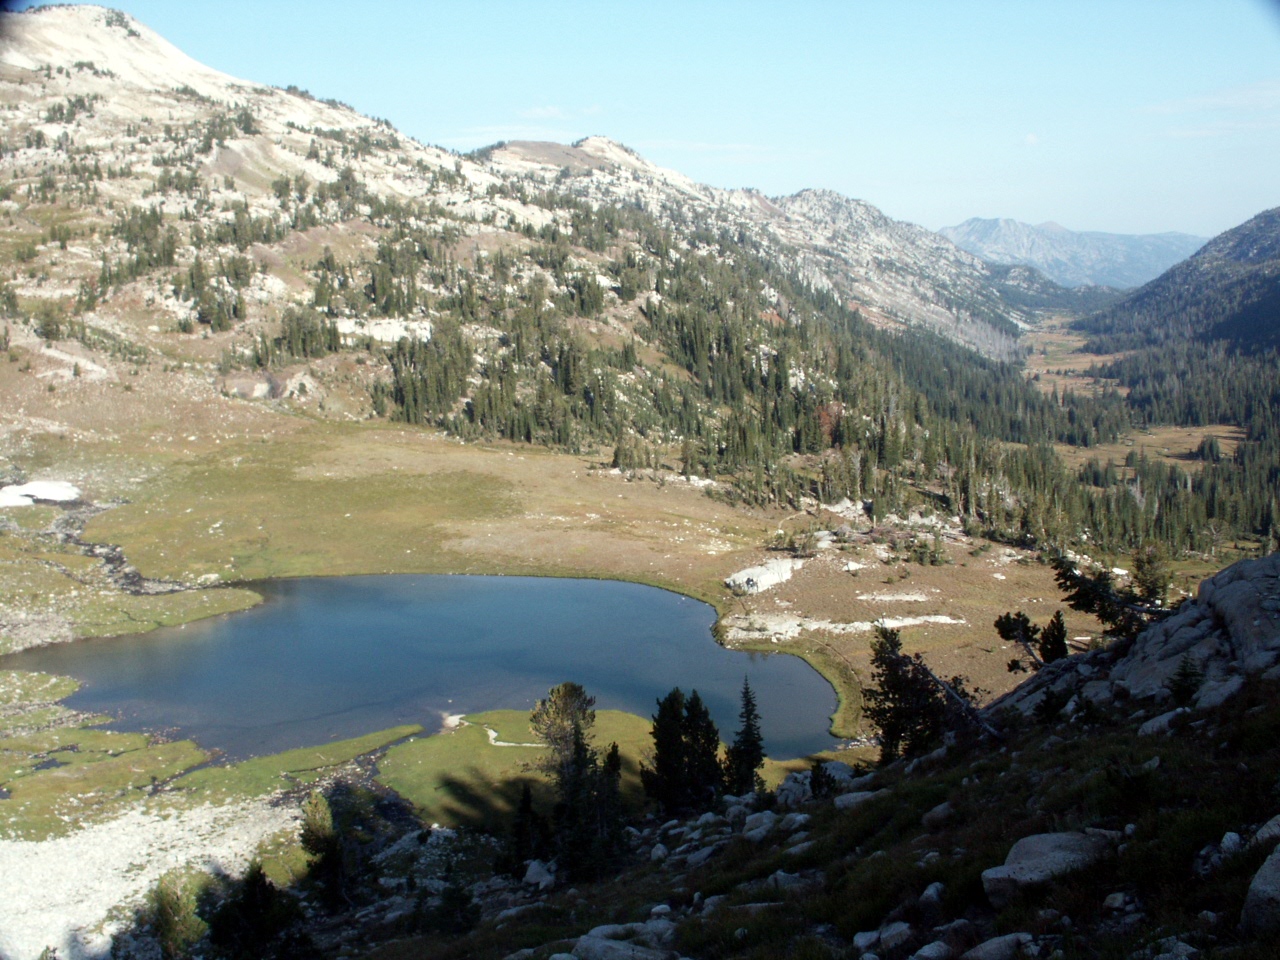 Upper Lake and the East Lostine